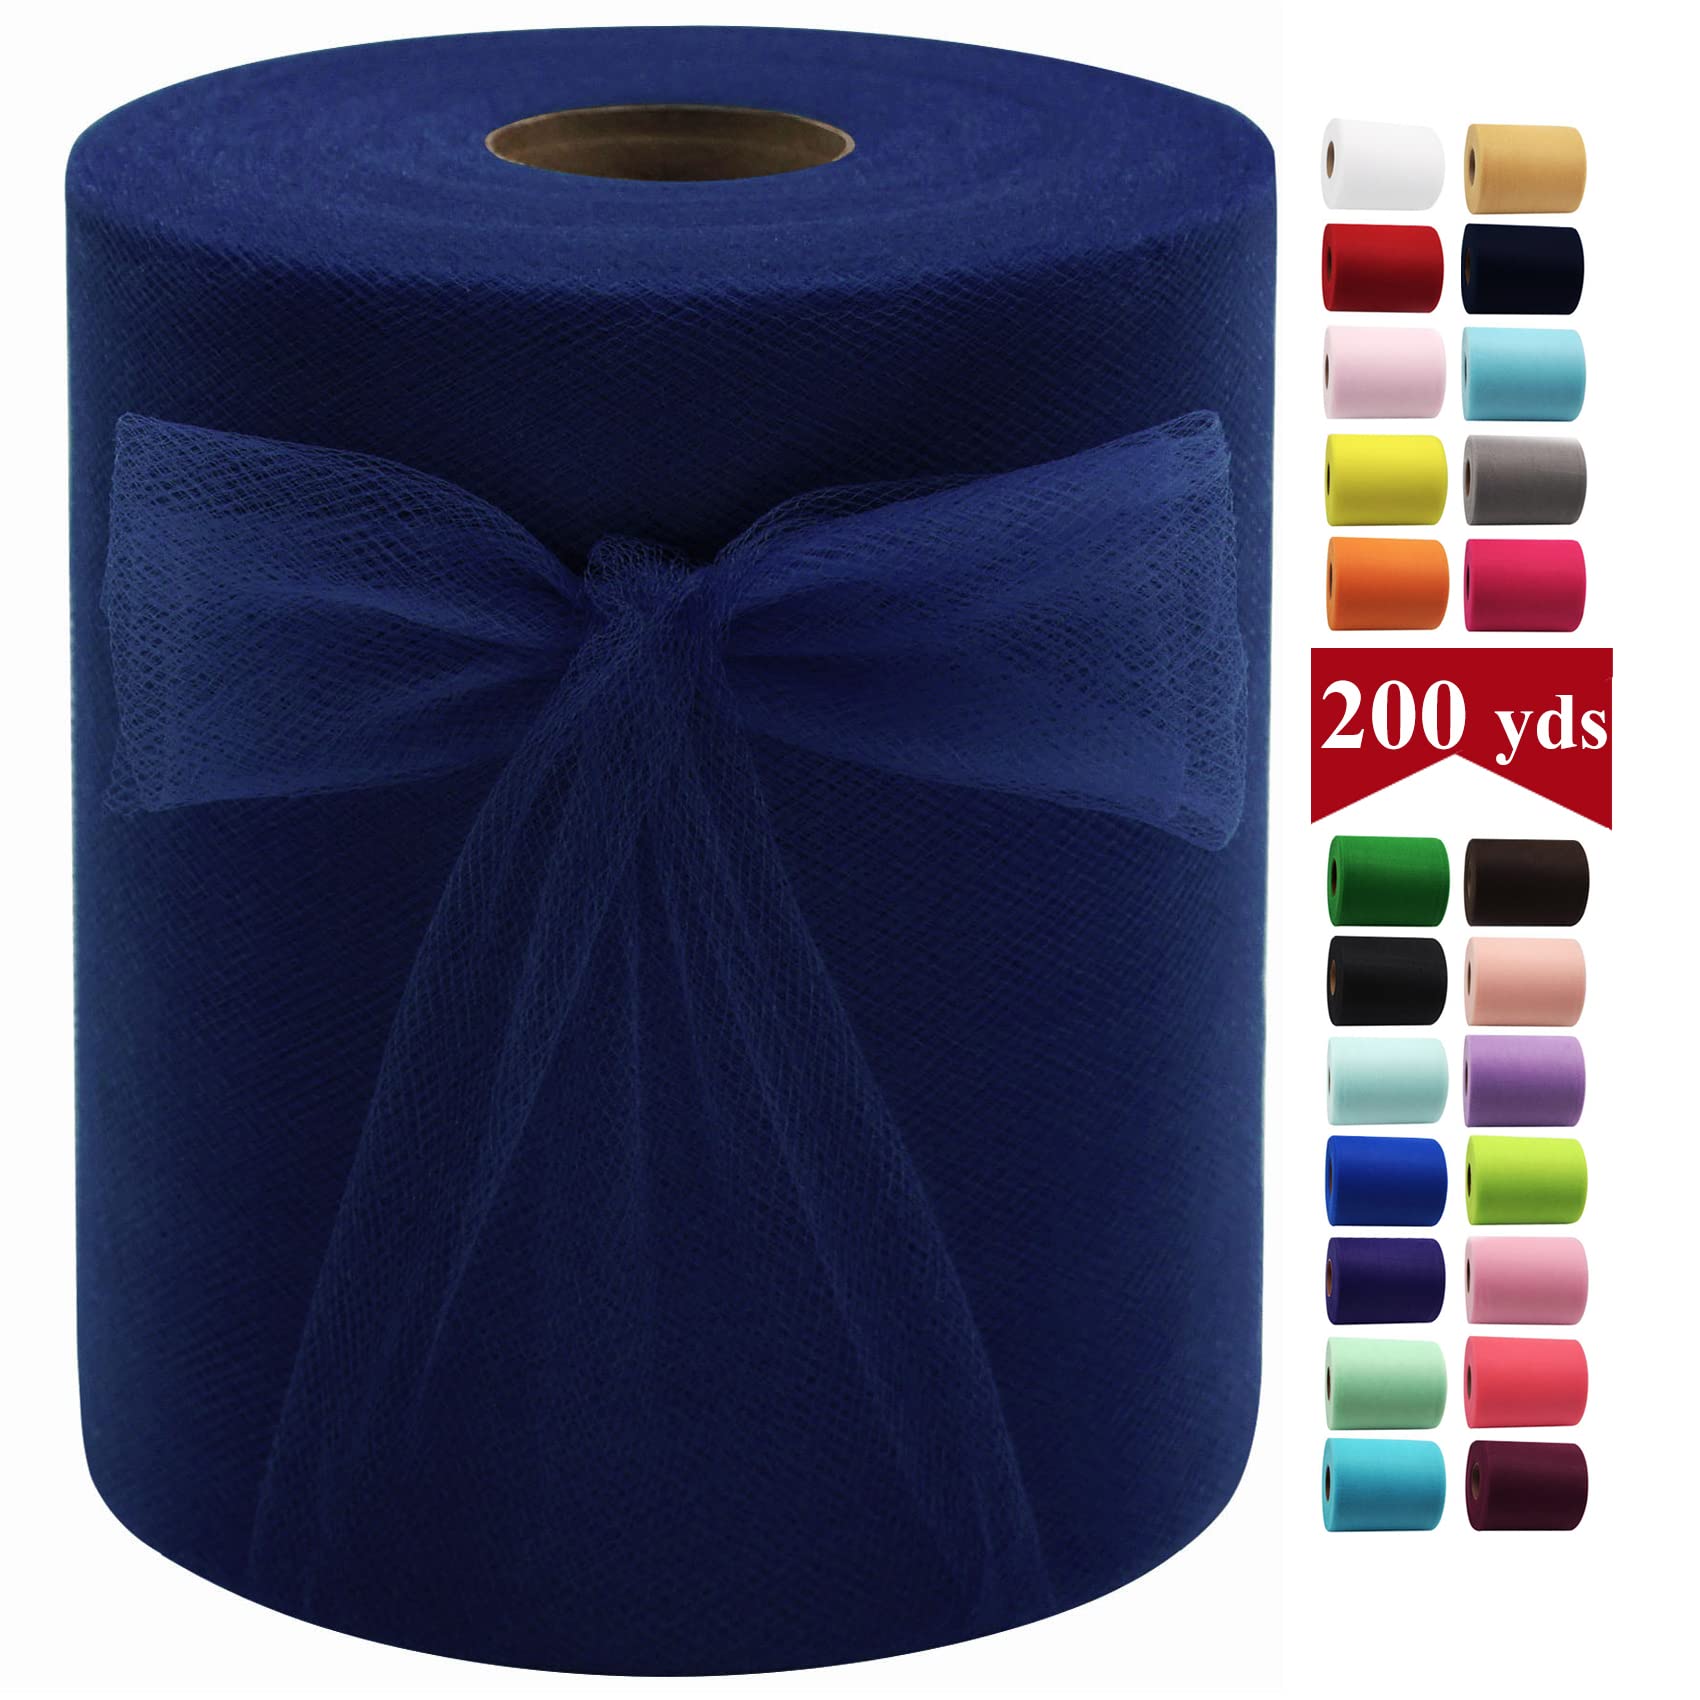 Frcolor Tulle Ribbon Fabric Roll Craft Spool Wedding Mesh Gift Wrapping Decorative Tutu Material, Size: 5.91 x 2.76 x 2.76